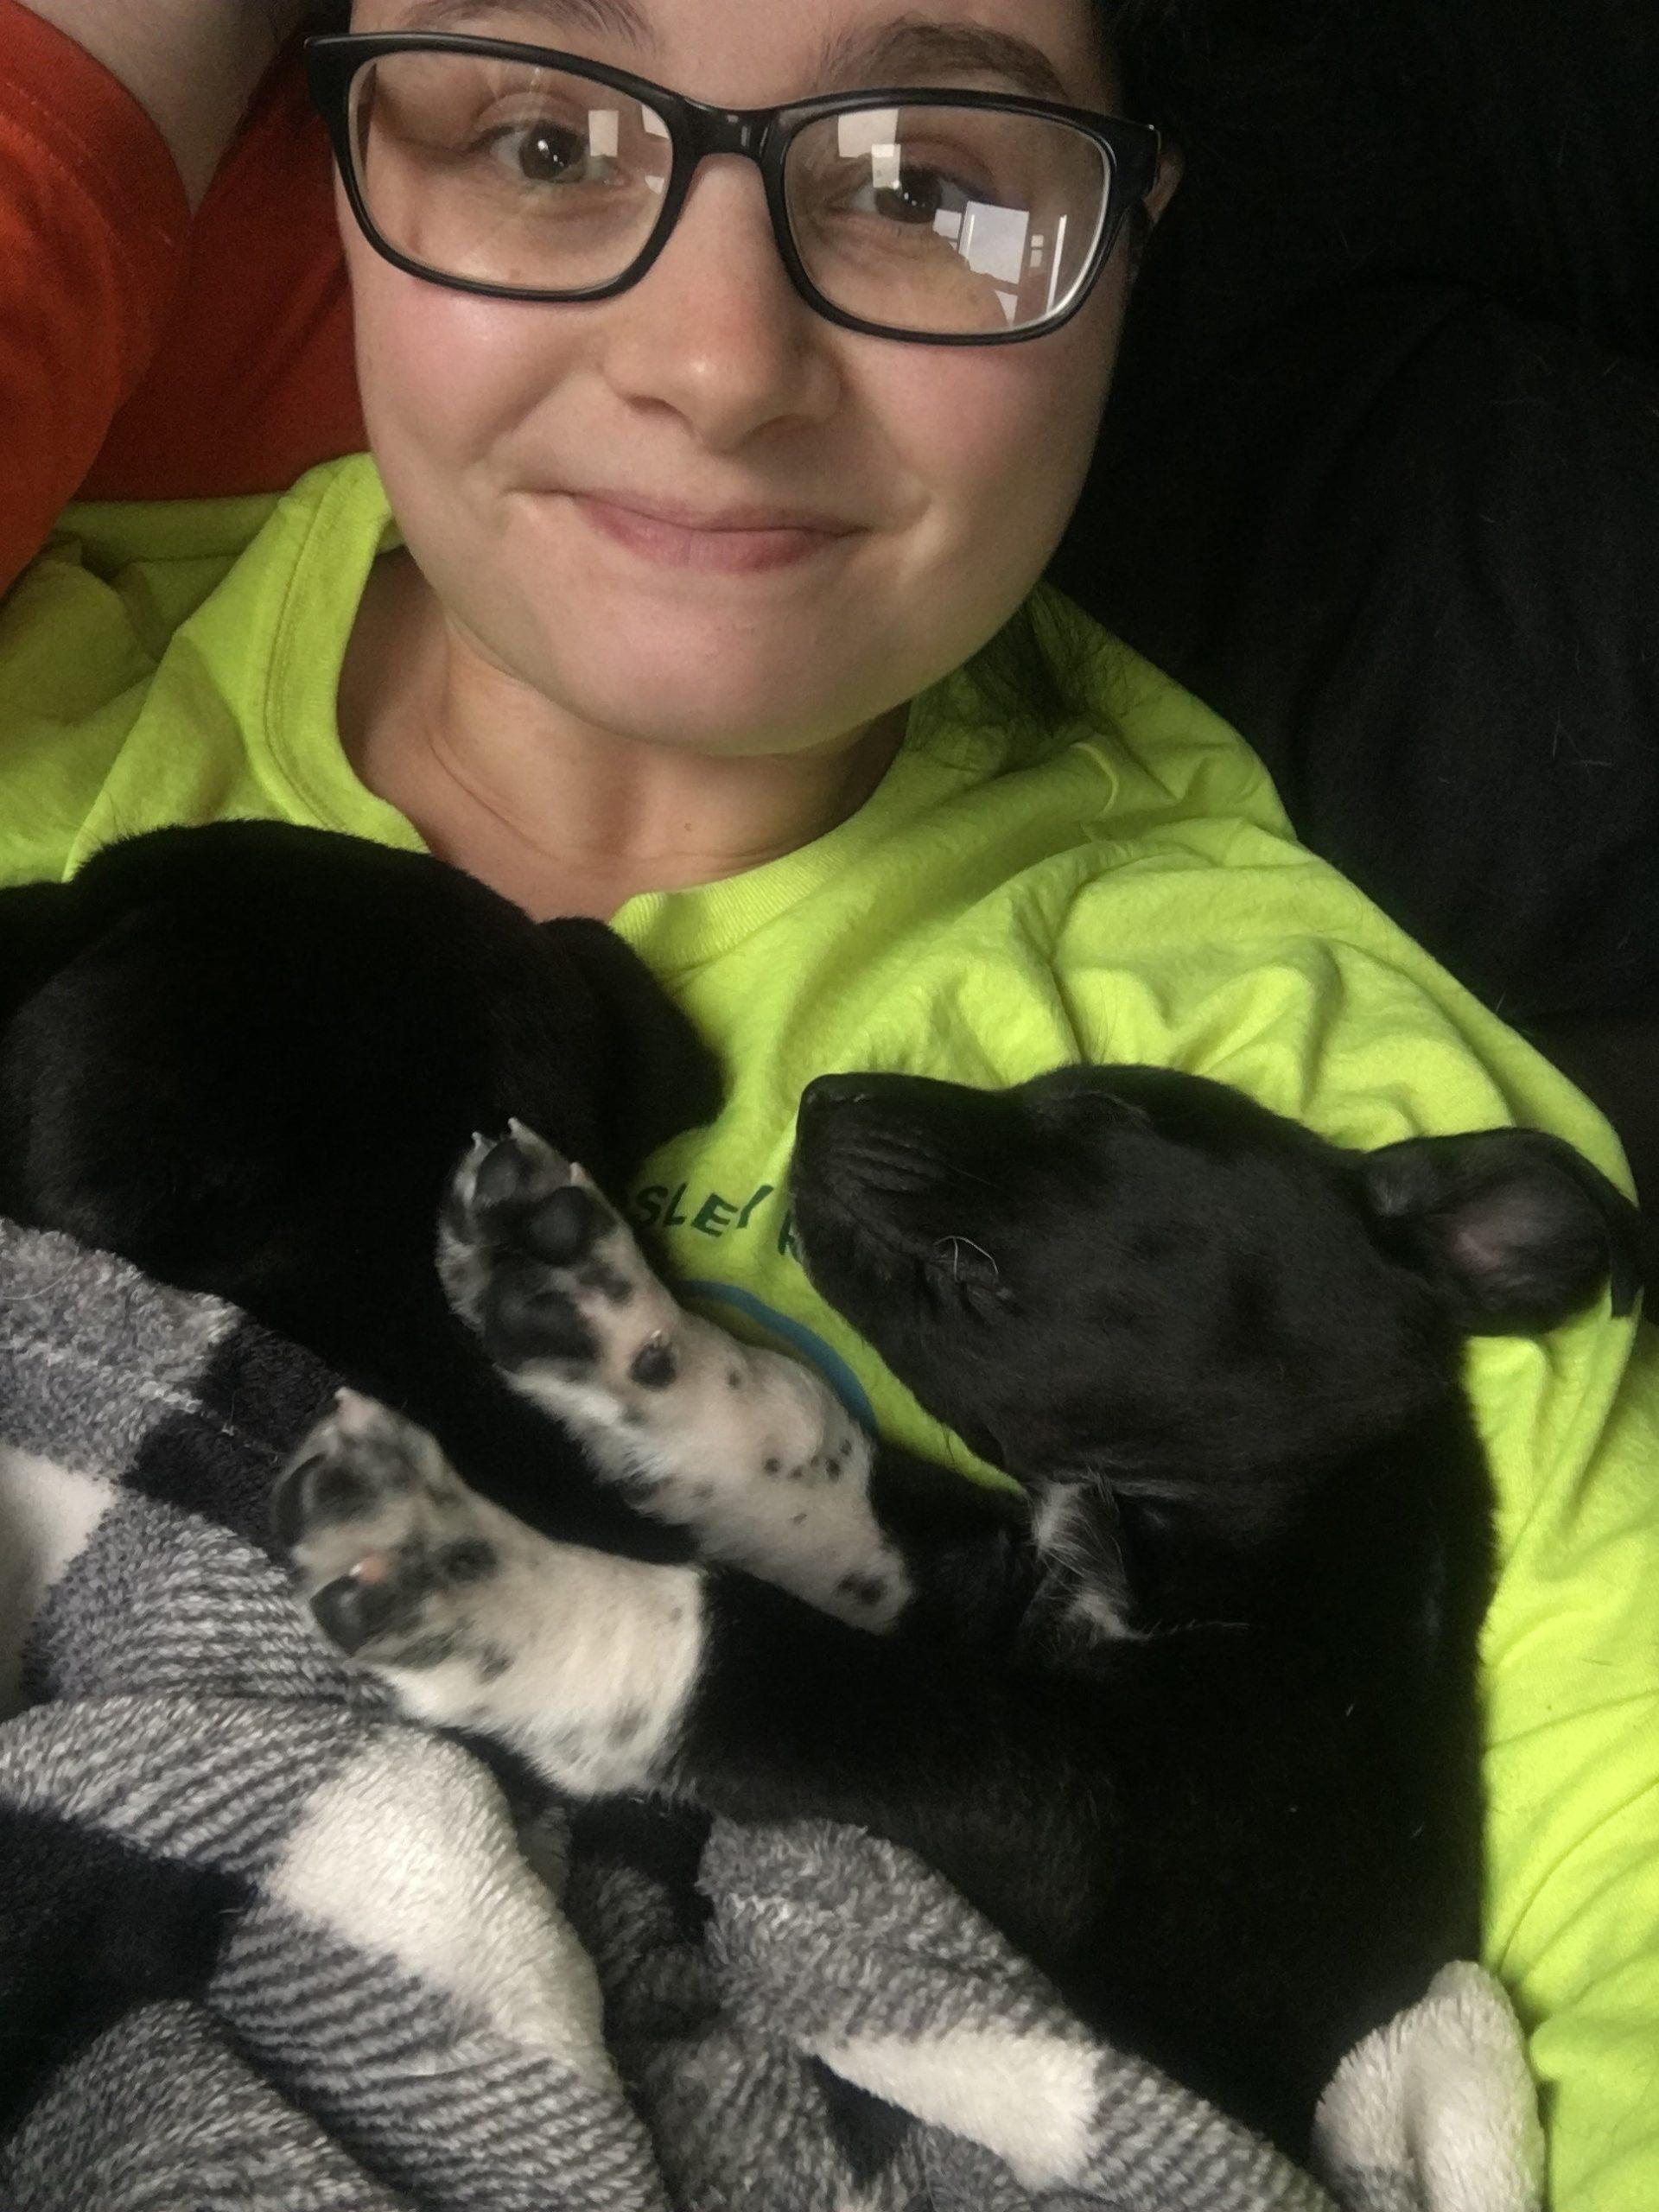 A woman in a neon green hoodie takes a selfie with two black puppies asleep on her.